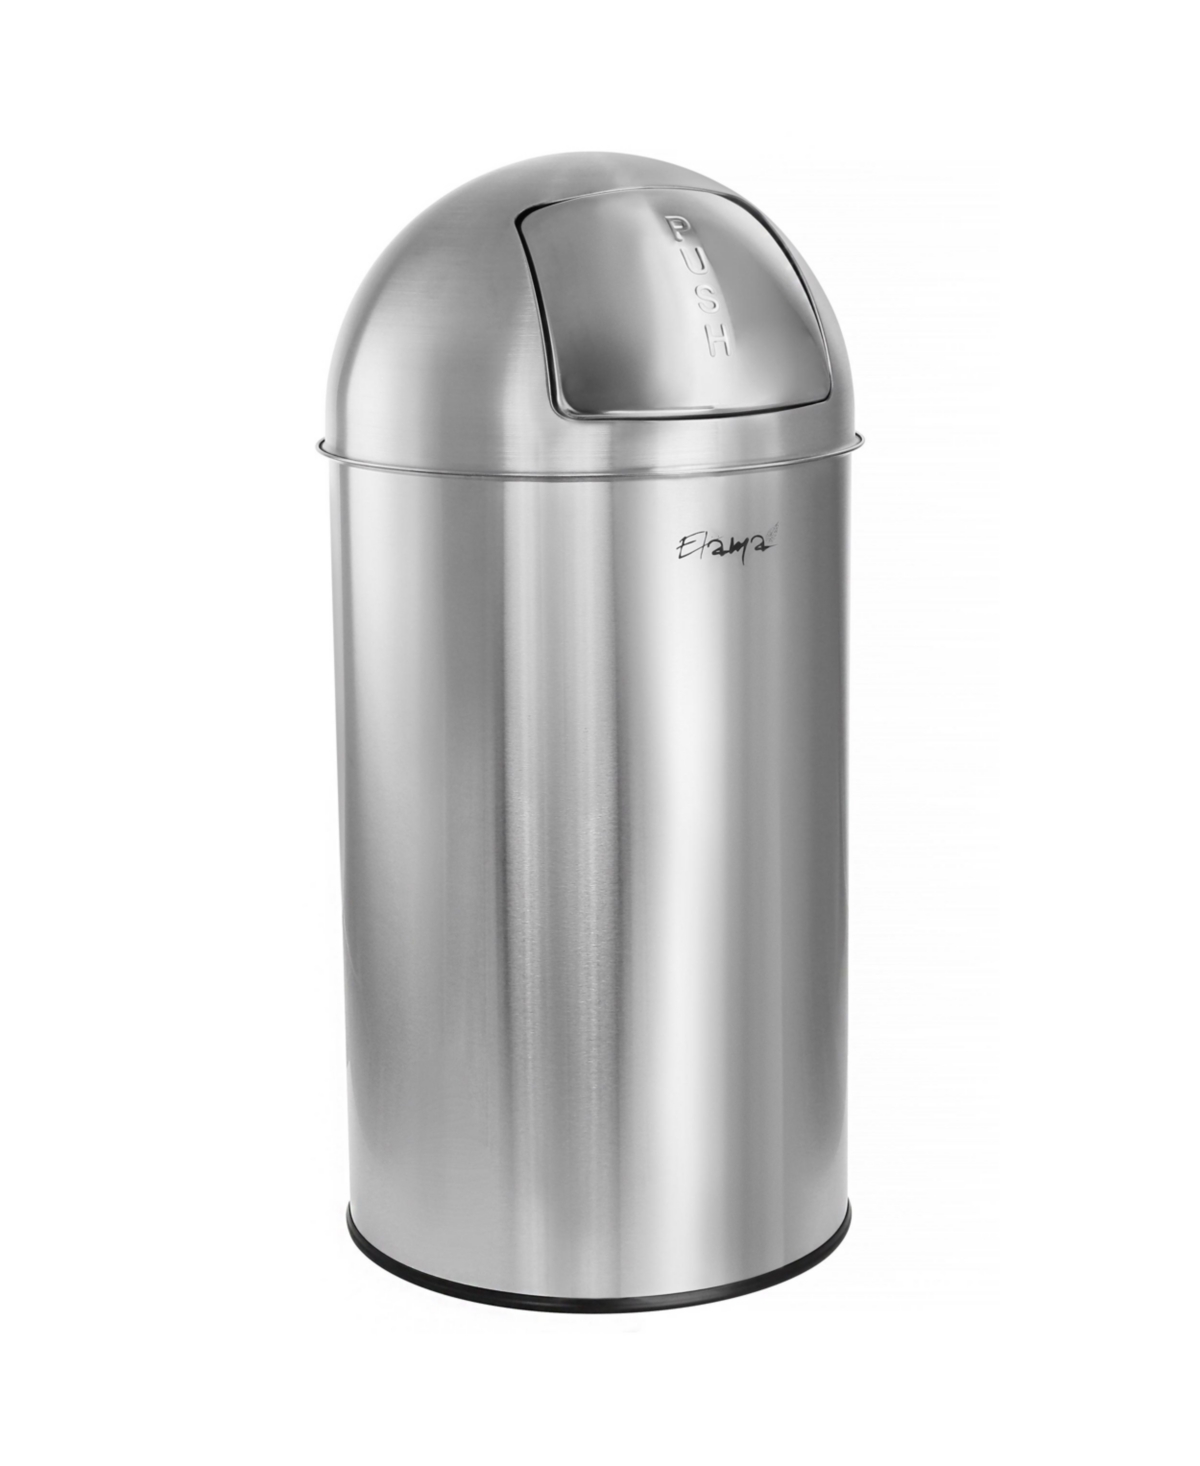 50 Liter Large 13 Gallon Push Lid Stainless Steel Cylindrical Home and Kitchen Trash Bin in Matte Silver - Silver